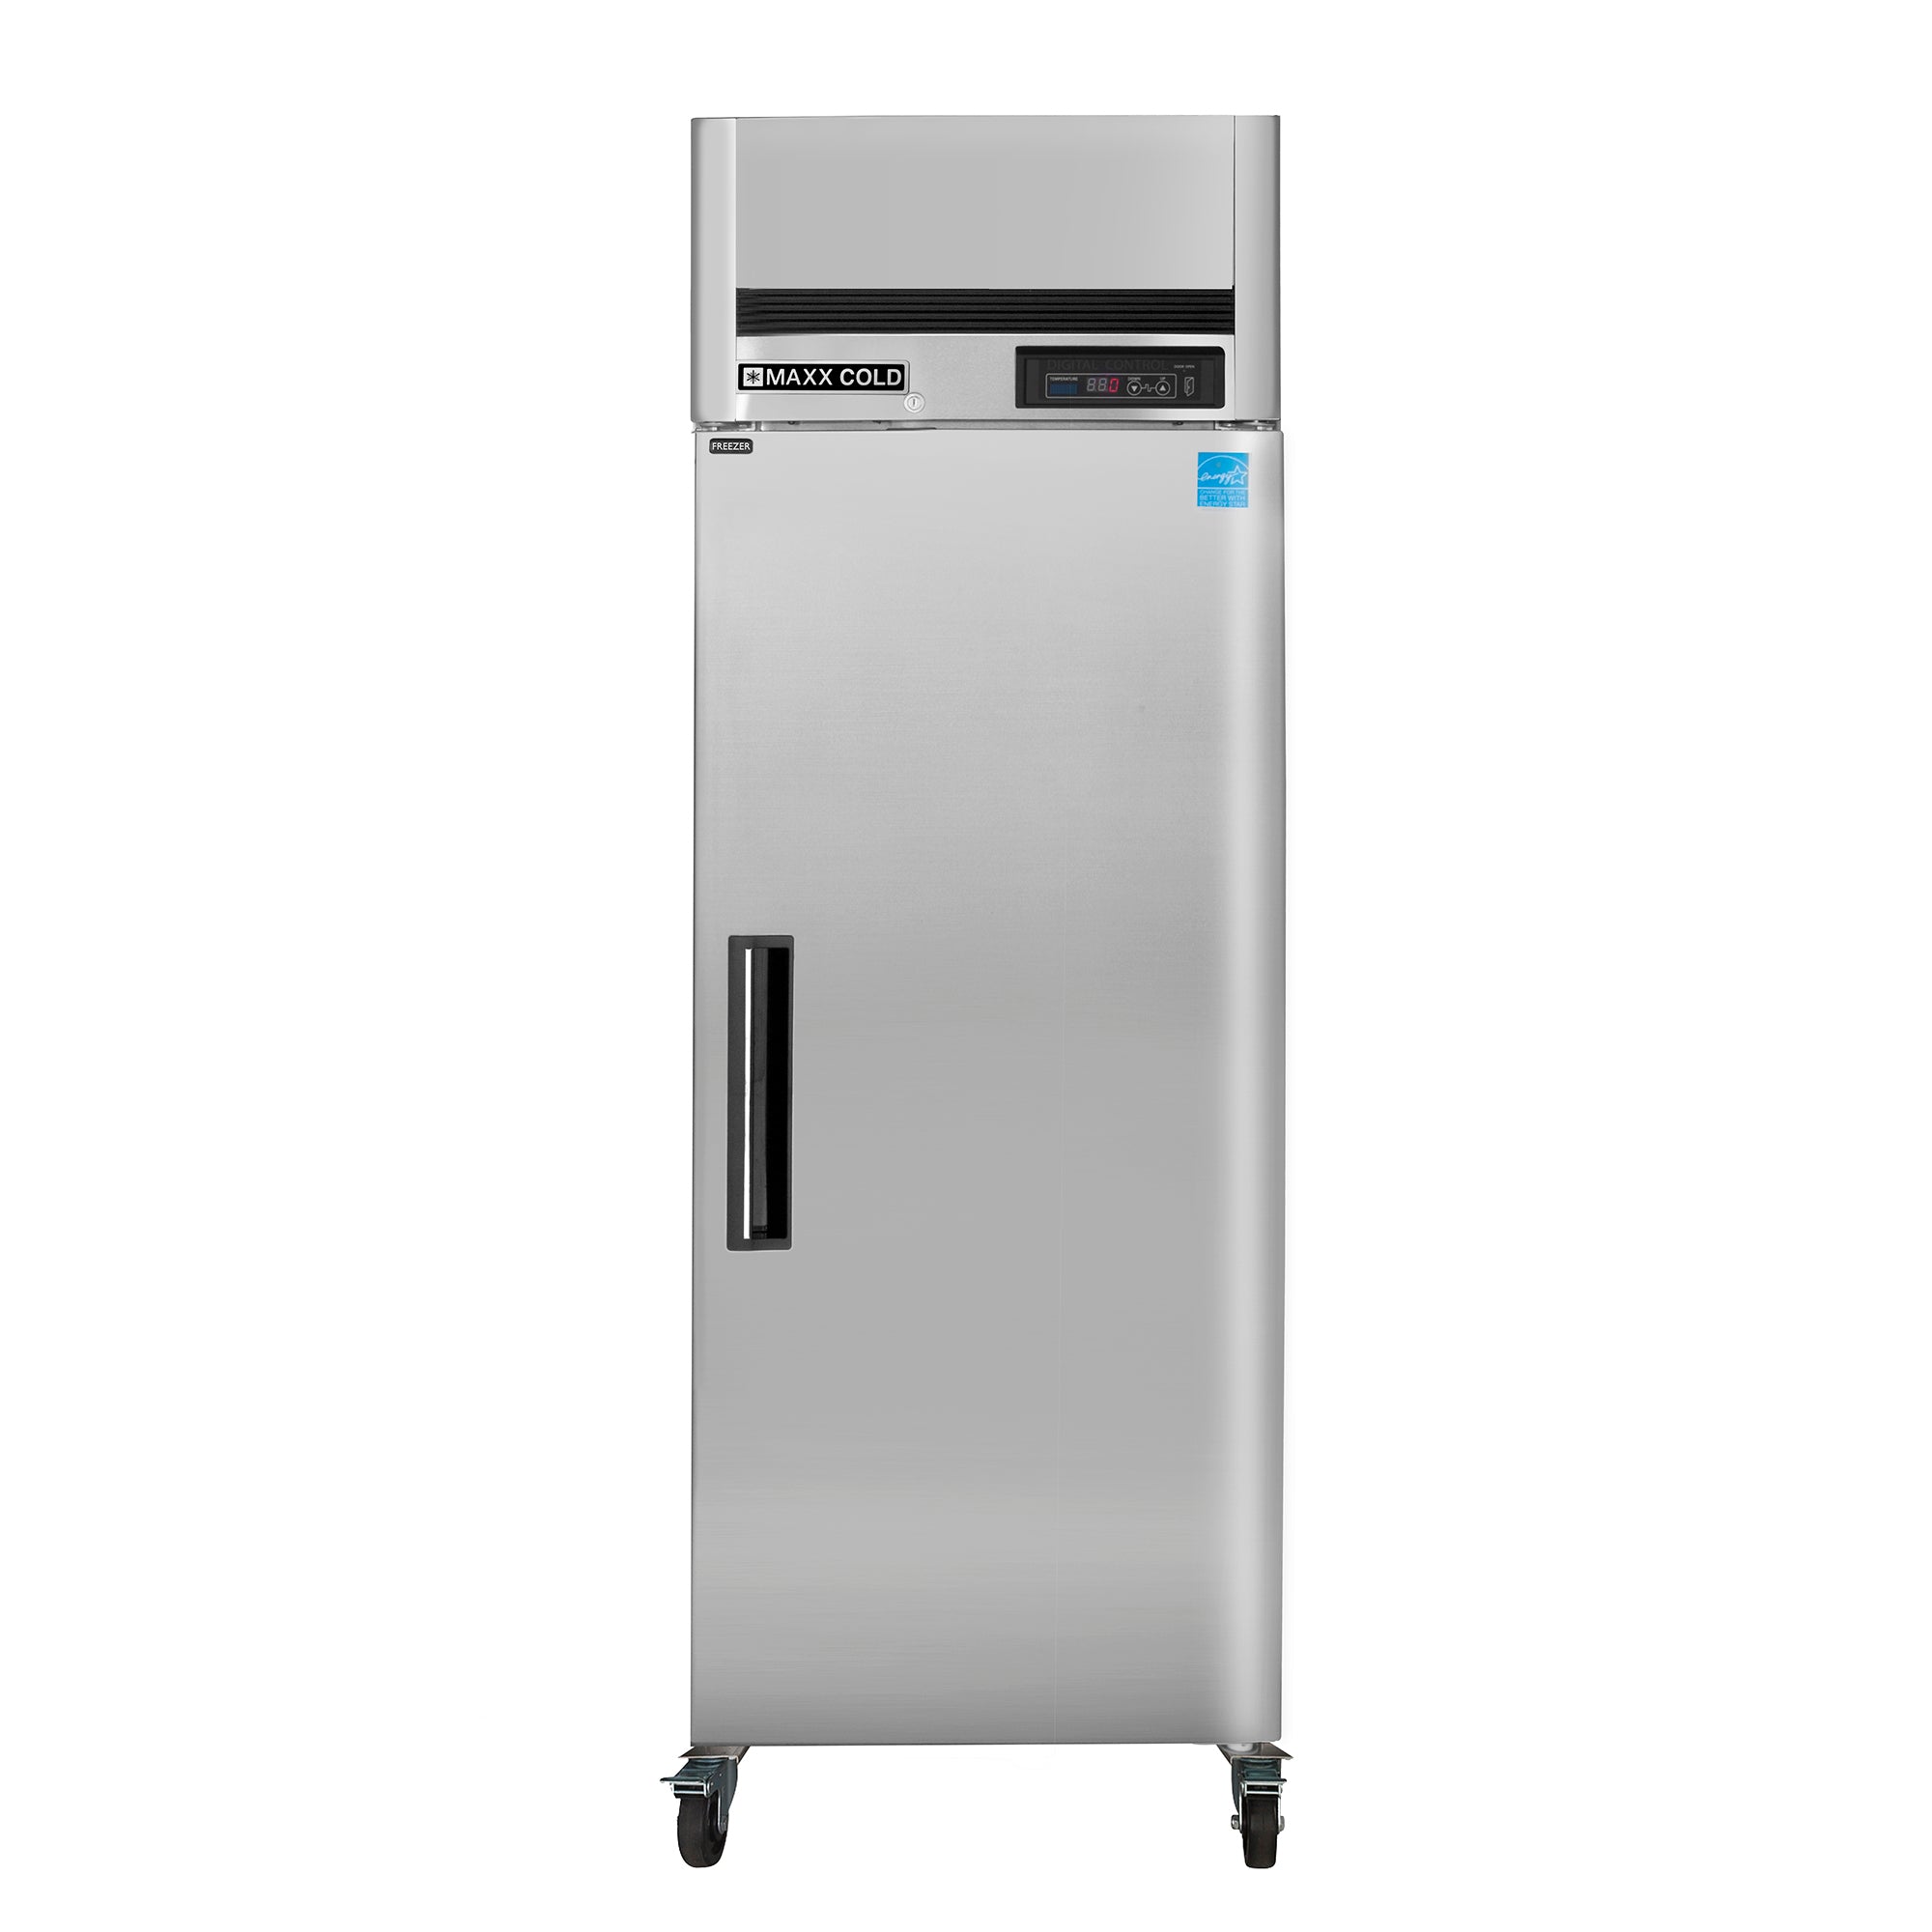 Maxx Cold - MCFT-23FDHC, Maxx Cold Single Door Reach-In Freezer, Top Mount, 27"W, 23 cu. ft. Storage Capacity, Energy Star Rated, in Stainless Steel